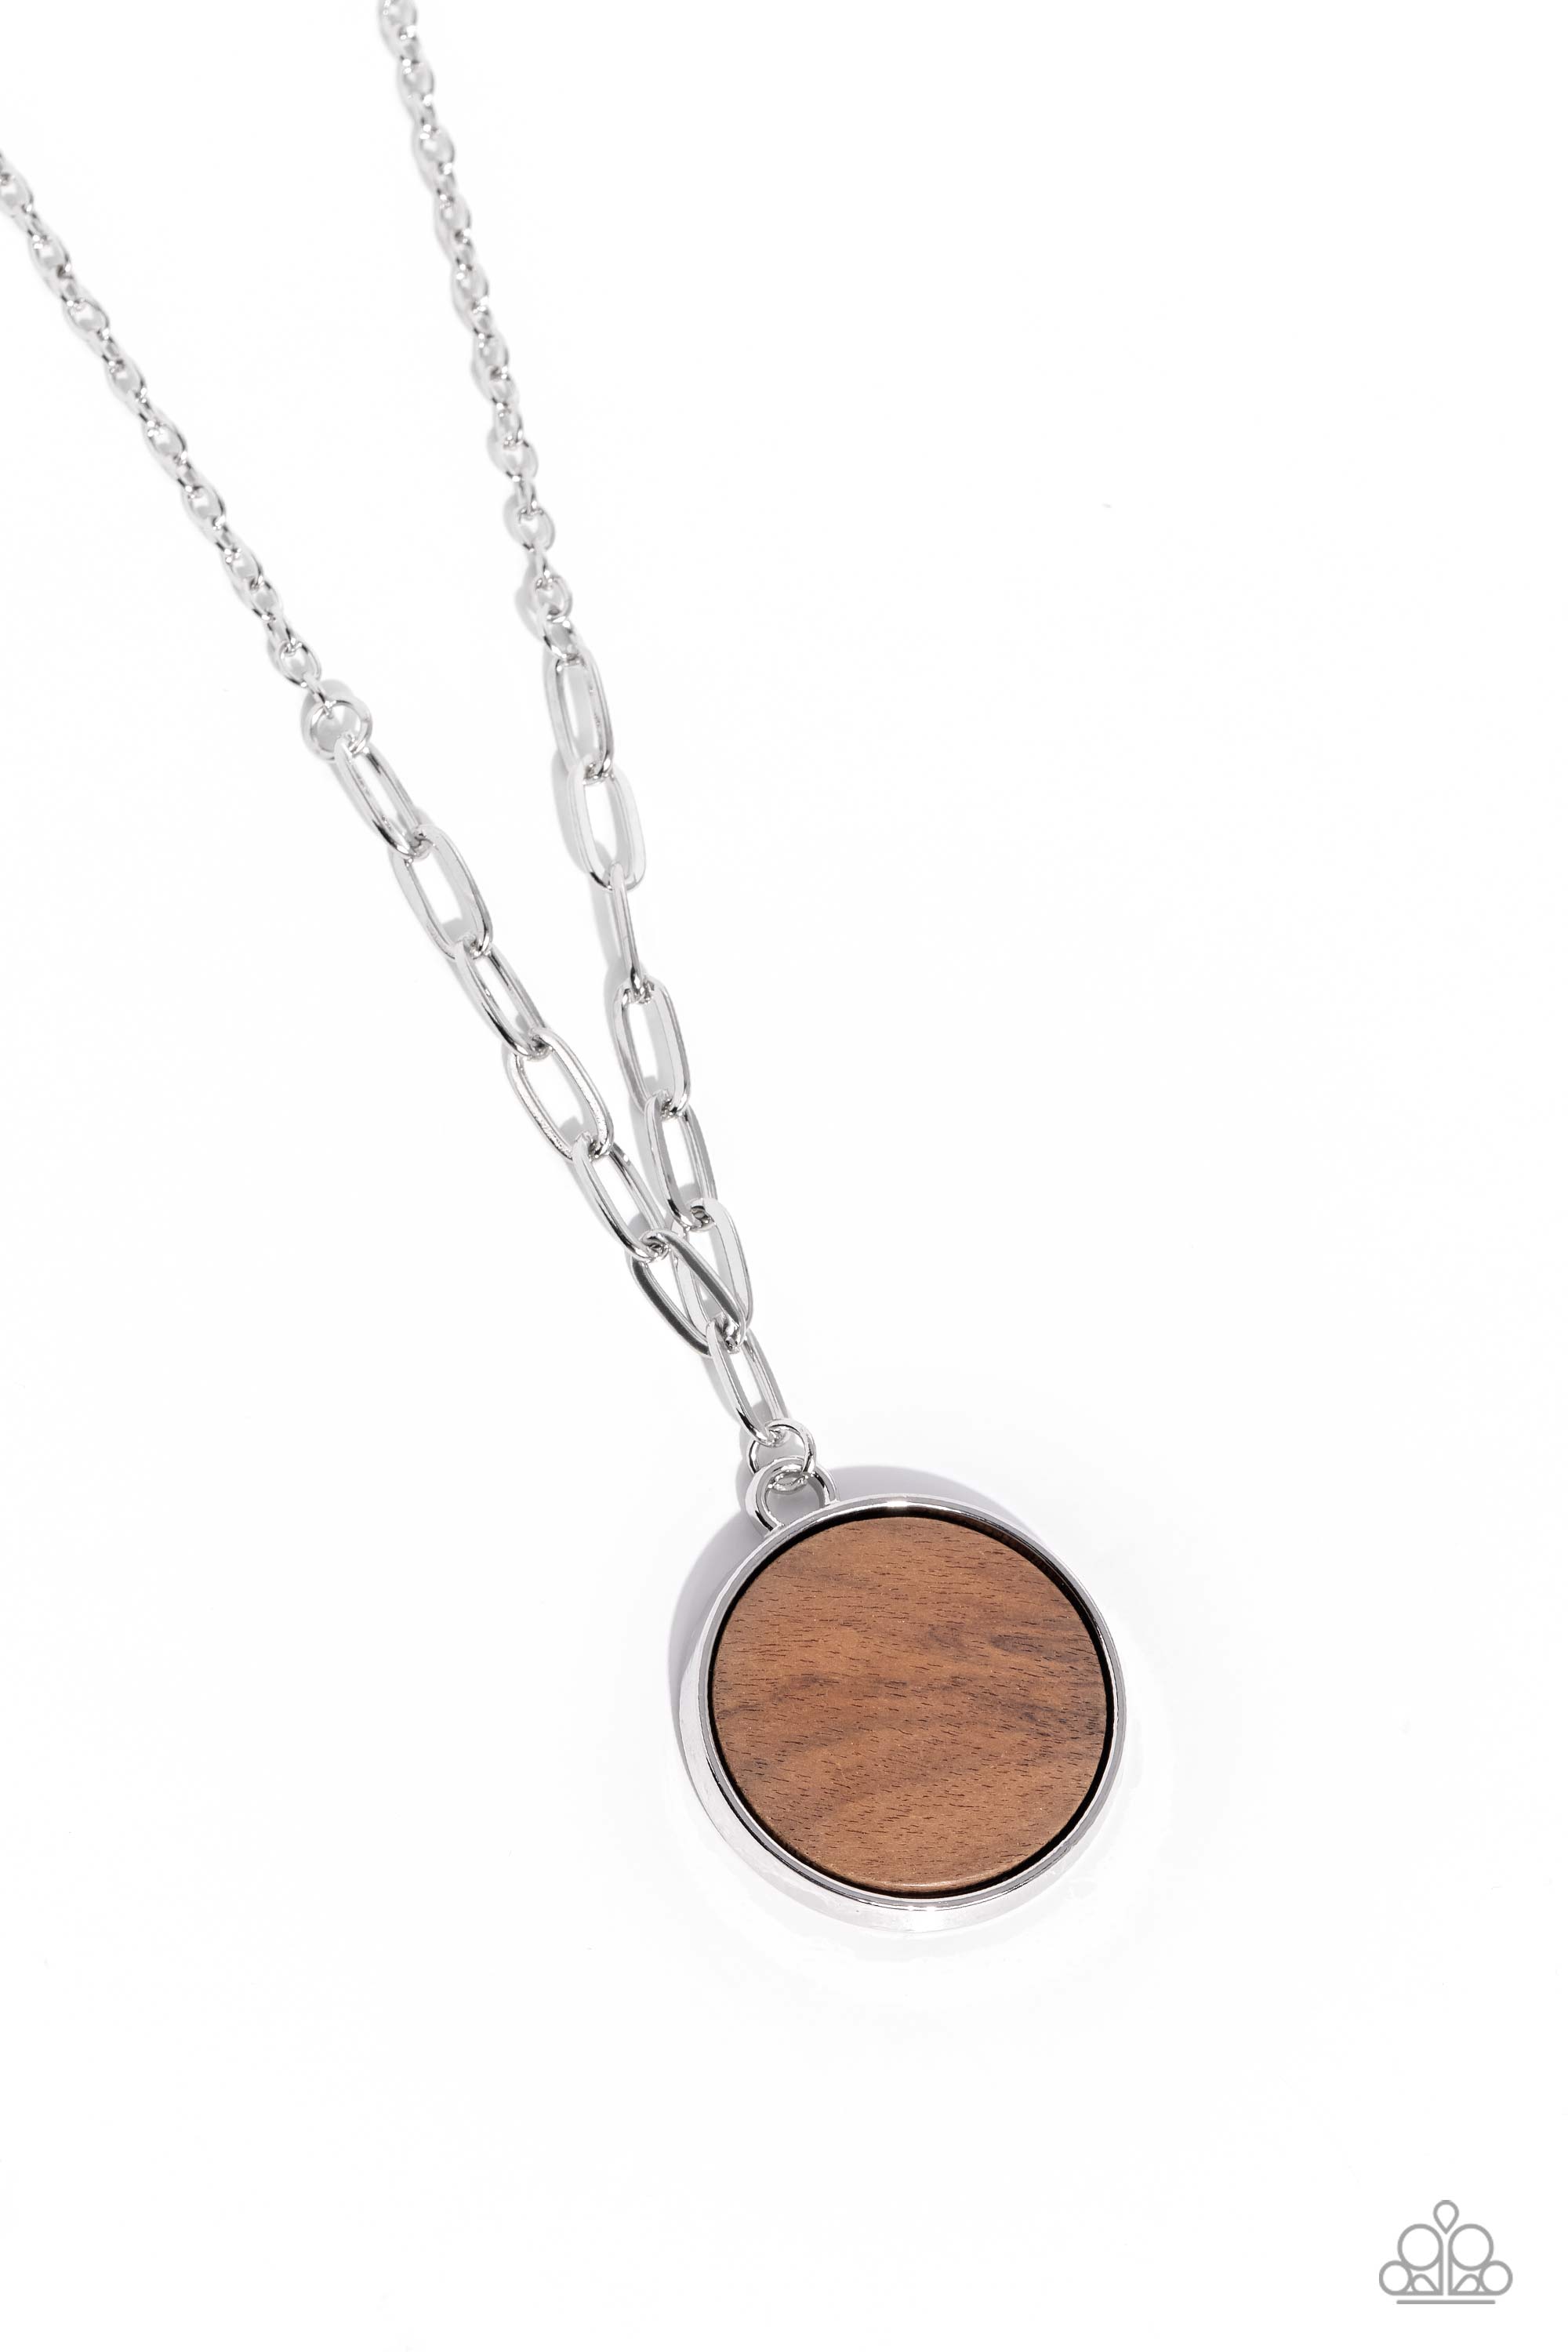 WOODNT DREAM OF IT BROWN-NECKLACE